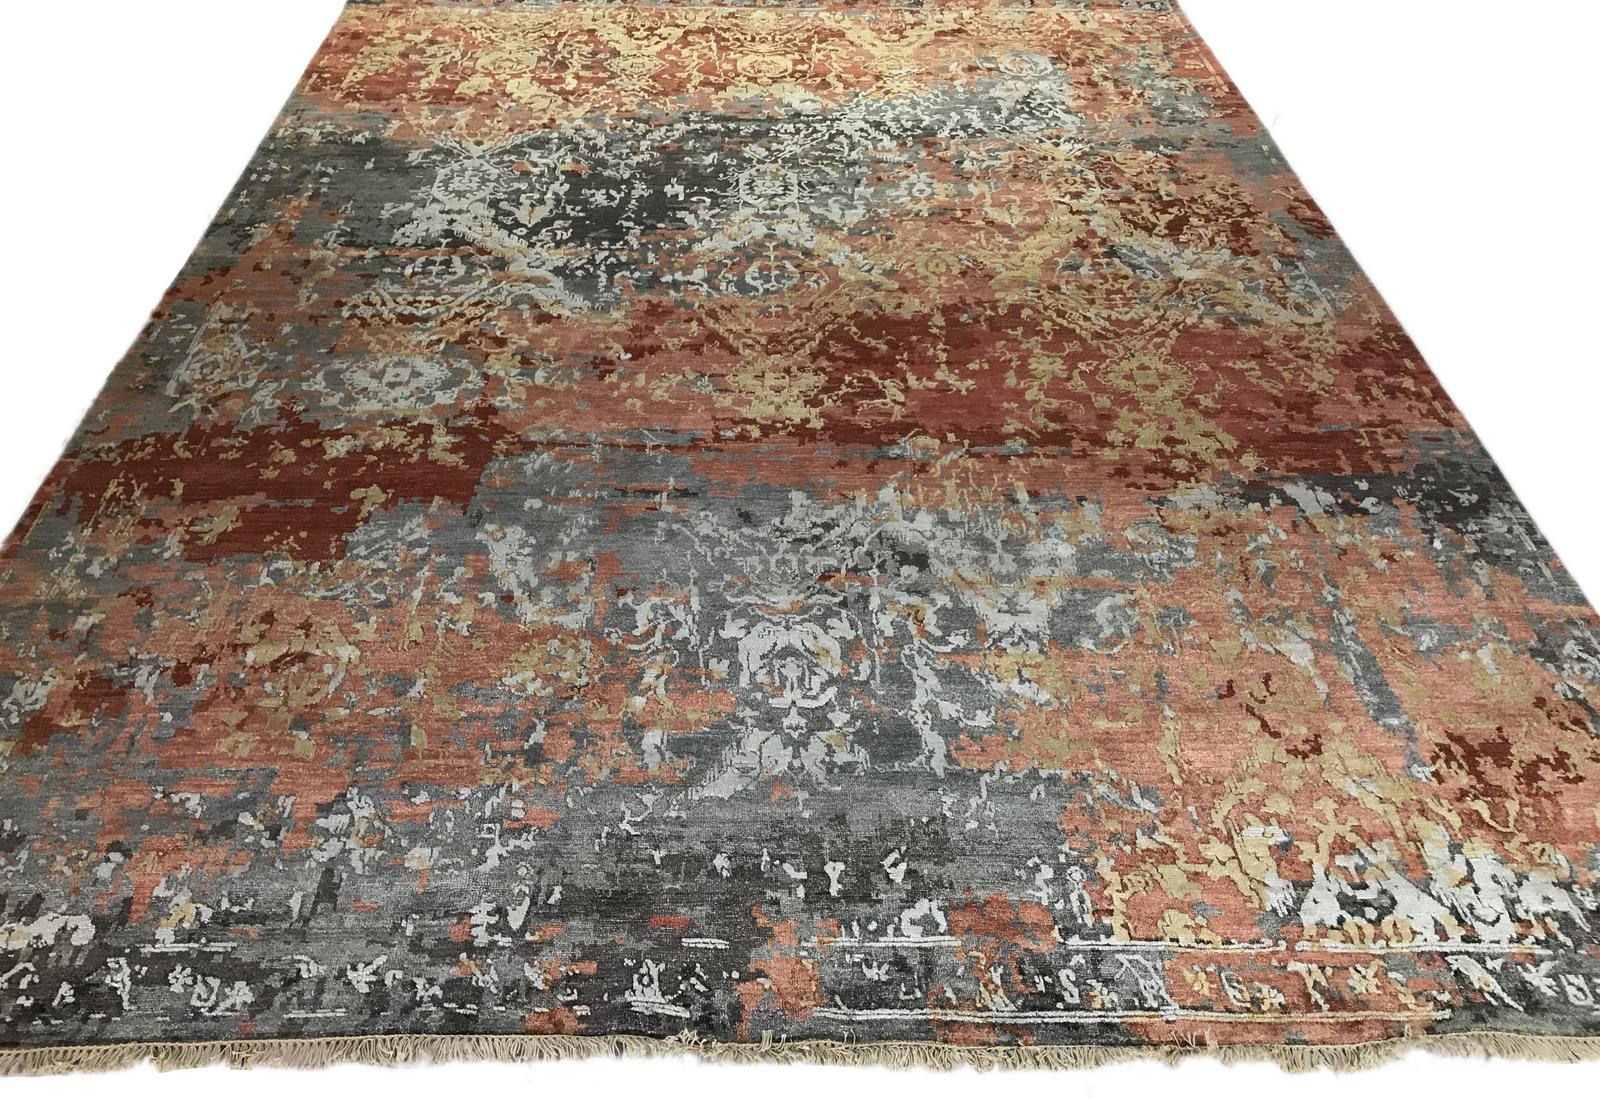 Fire and stone come together in this popular transitional Indian wool area rug. Shades of red and gold generate heat against a cool slate gray background. The high low style adds texture and creates a flame that begs to be touched!